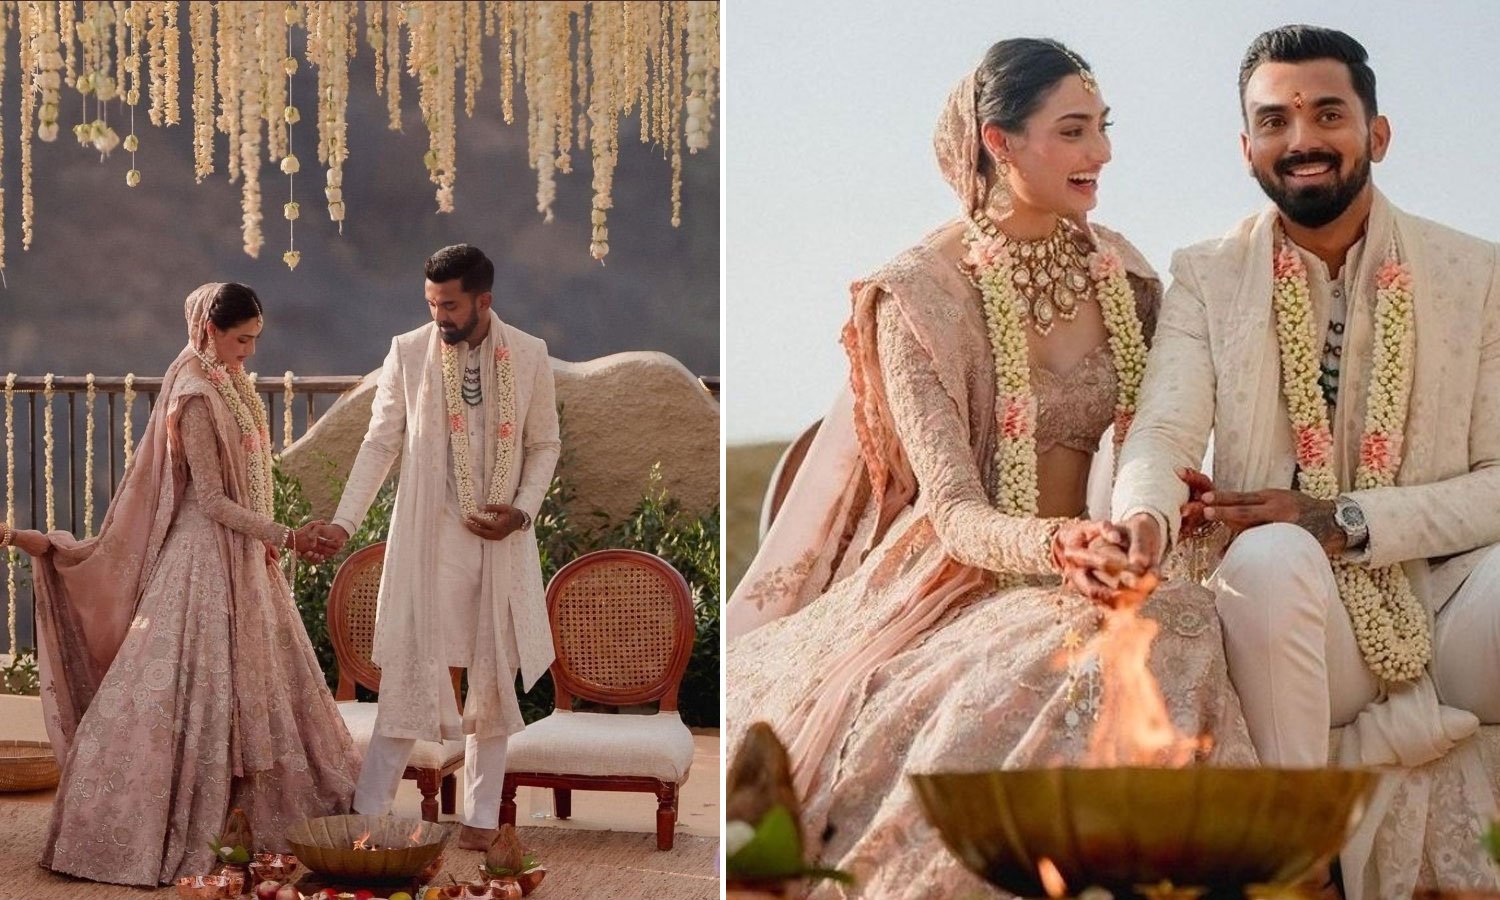 Actress Athiya Shetty and cricketer KL Rahul's wedding photos are out